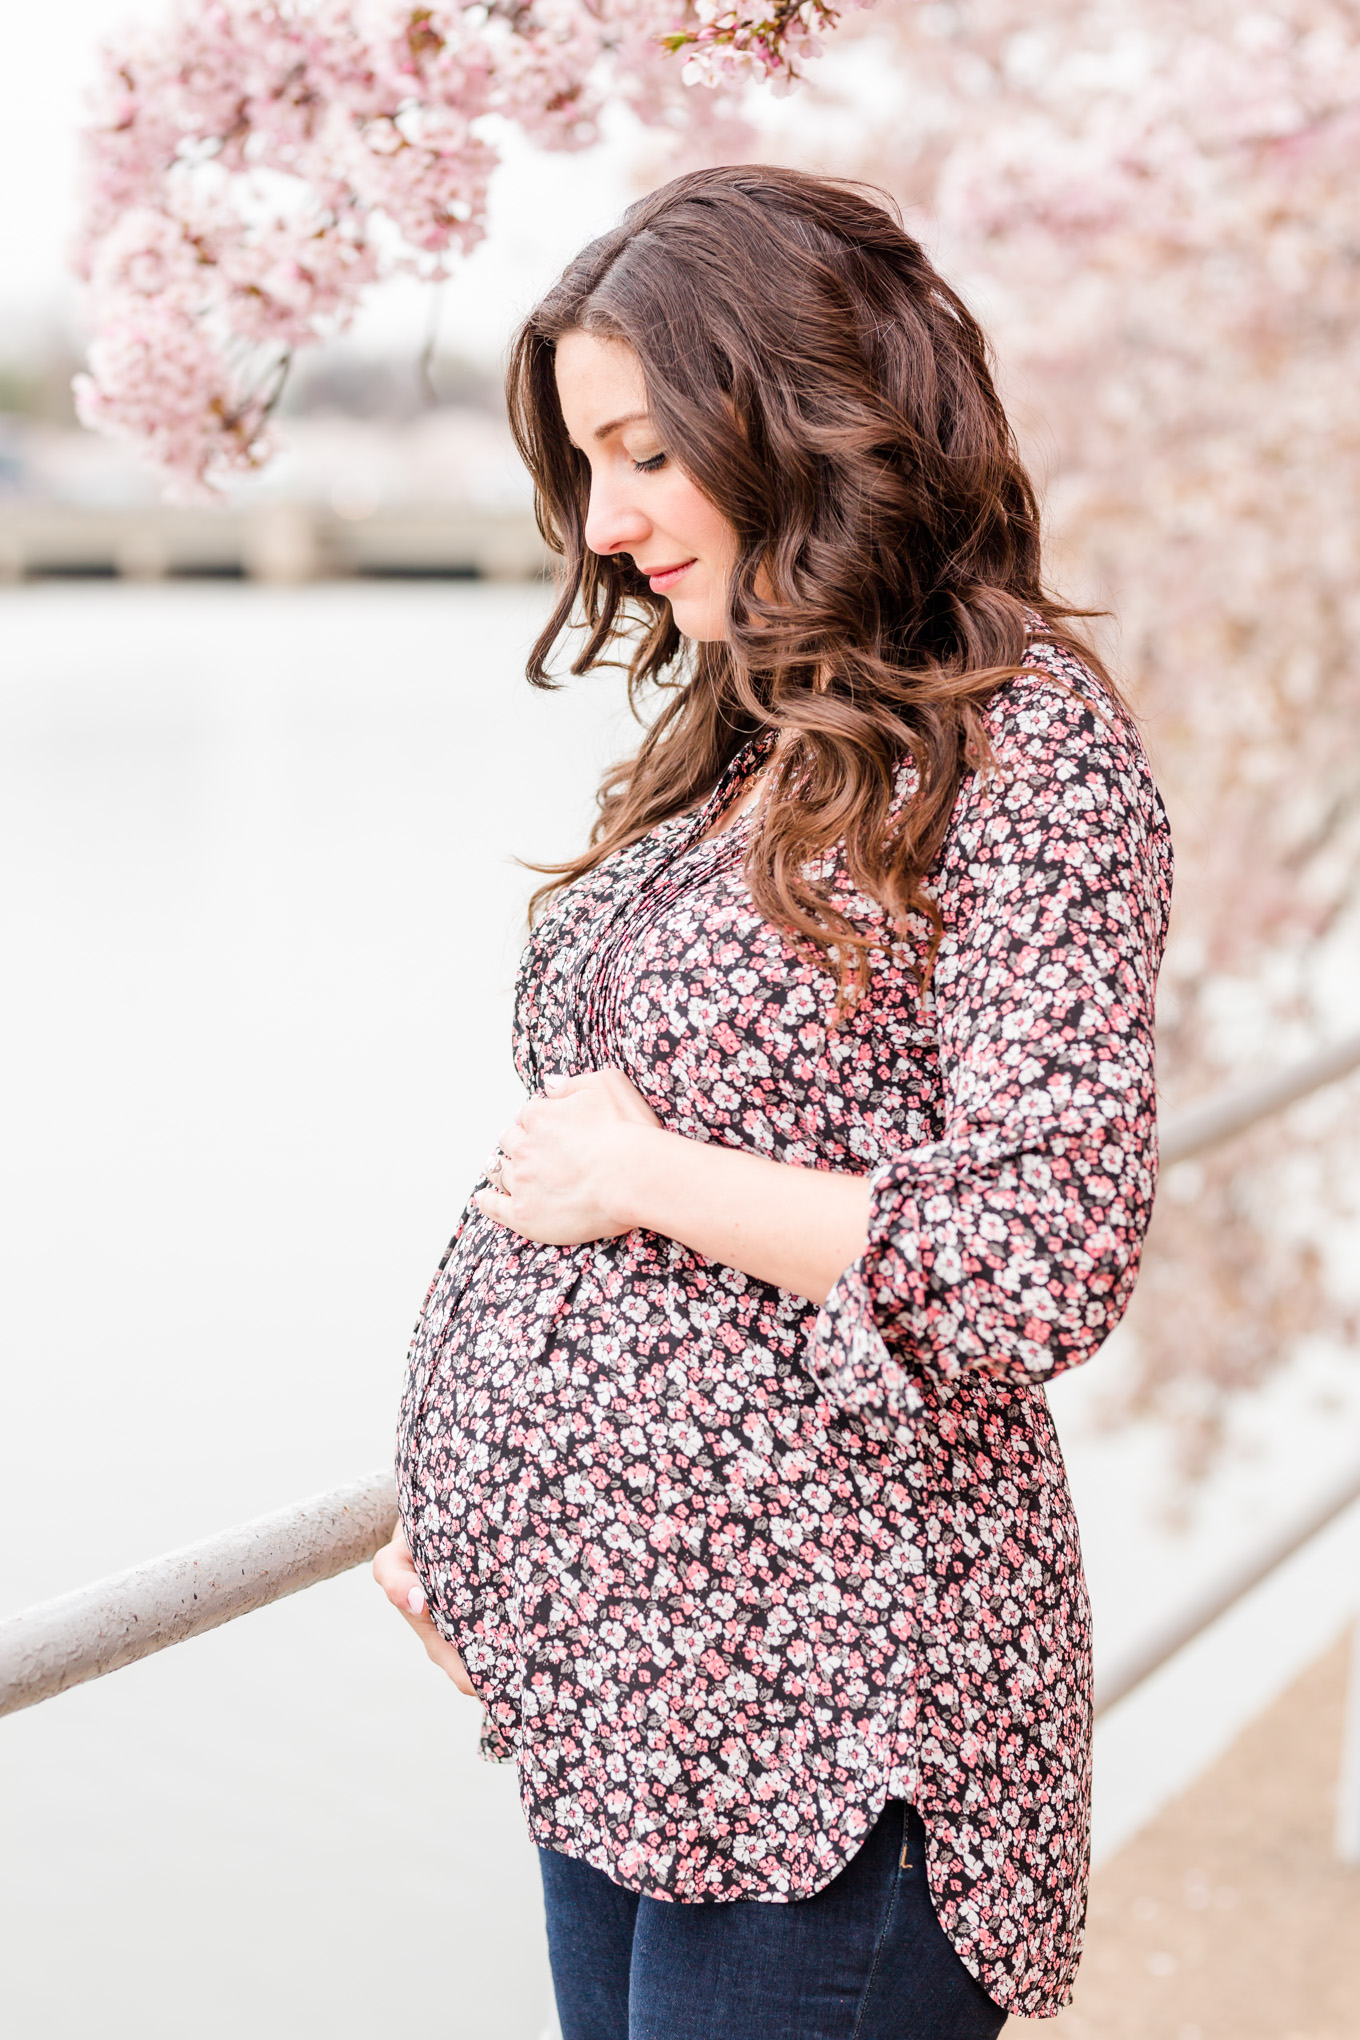 D.C. cherry blossoms maternity session, maternity portraits, maternity photos, D.C. cherry blossoms, cherry blossoms maternity photo, floral print top, brunette expectant mom, expecting mother, brunette woman, pregnant woman, third trimester, baby bump